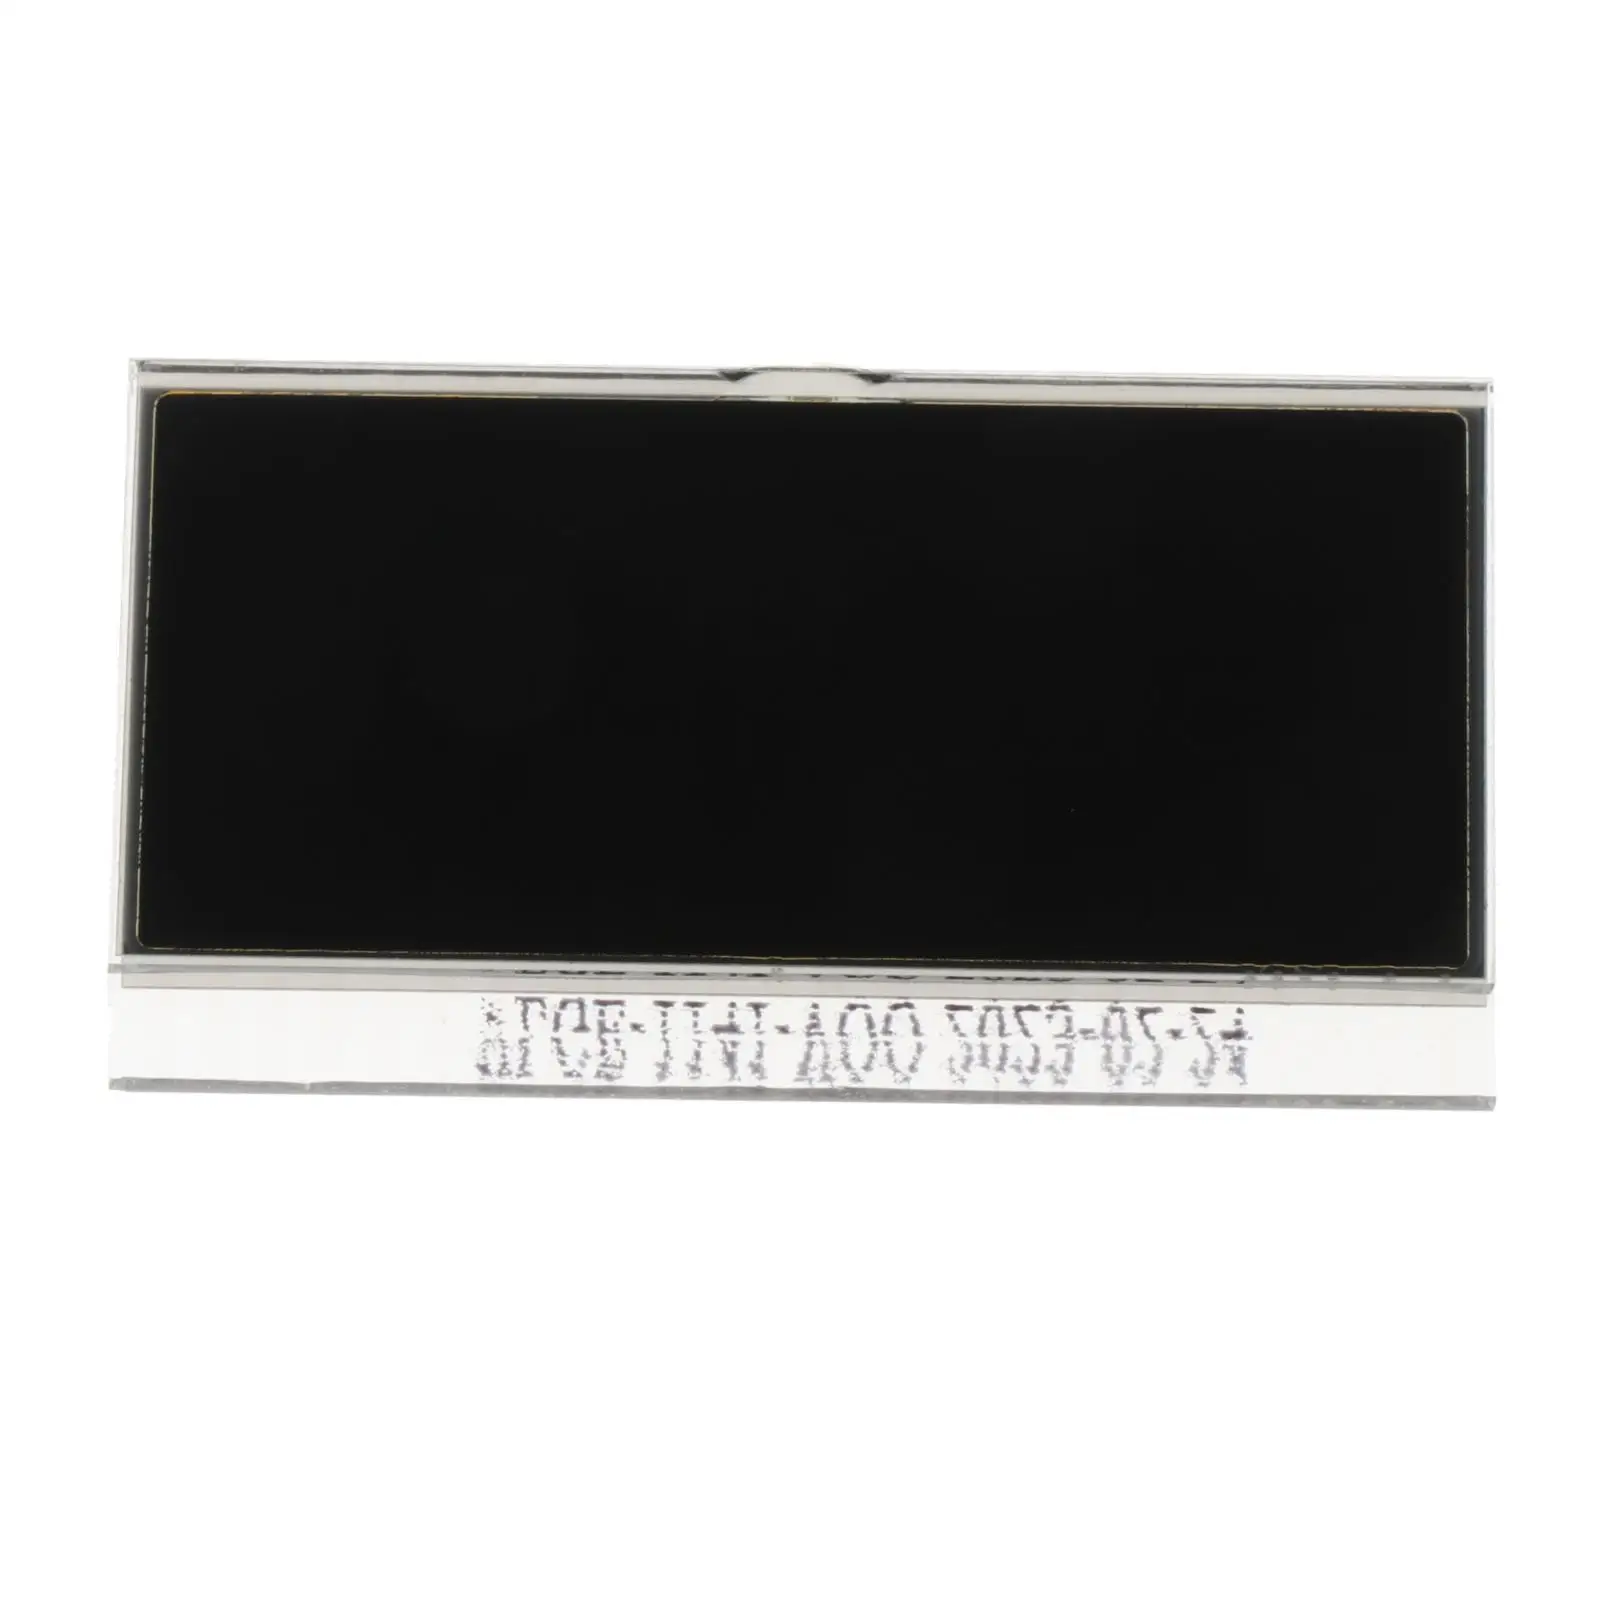 LCD Display Screen Replace for Audi A6 4F Q7 4L 2005-2012 Accessory